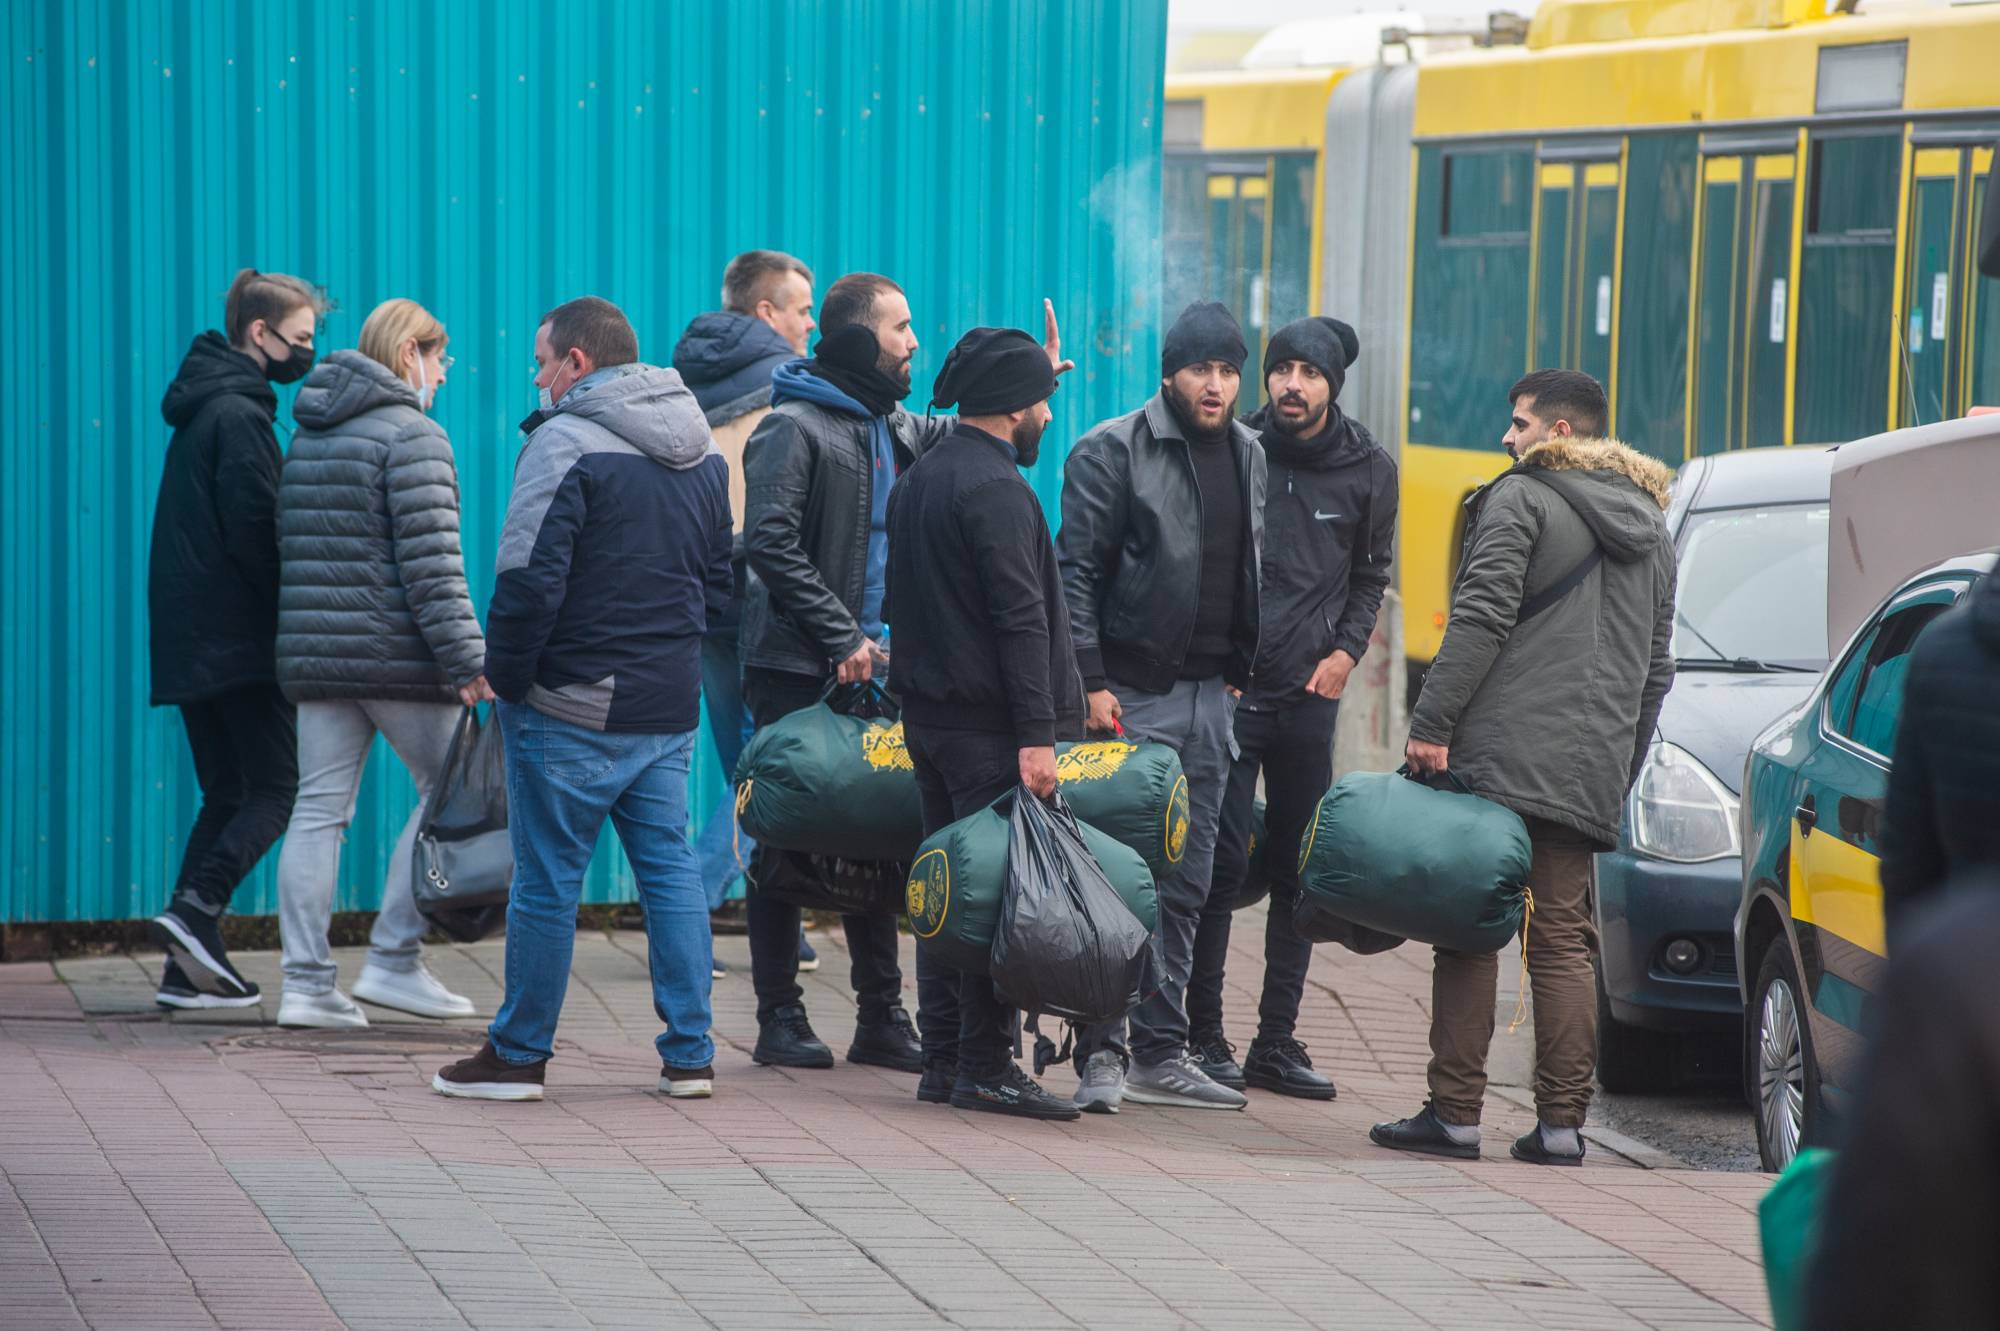 Migrants congregate at a market in Minsk on Saturday. Iraqi Kurds and other migrants said they were fleeing despair at home, but Belarus encouraged them to come, offering visas and helping them get to the border with other European countries.  | THE NEW YORK TIMES